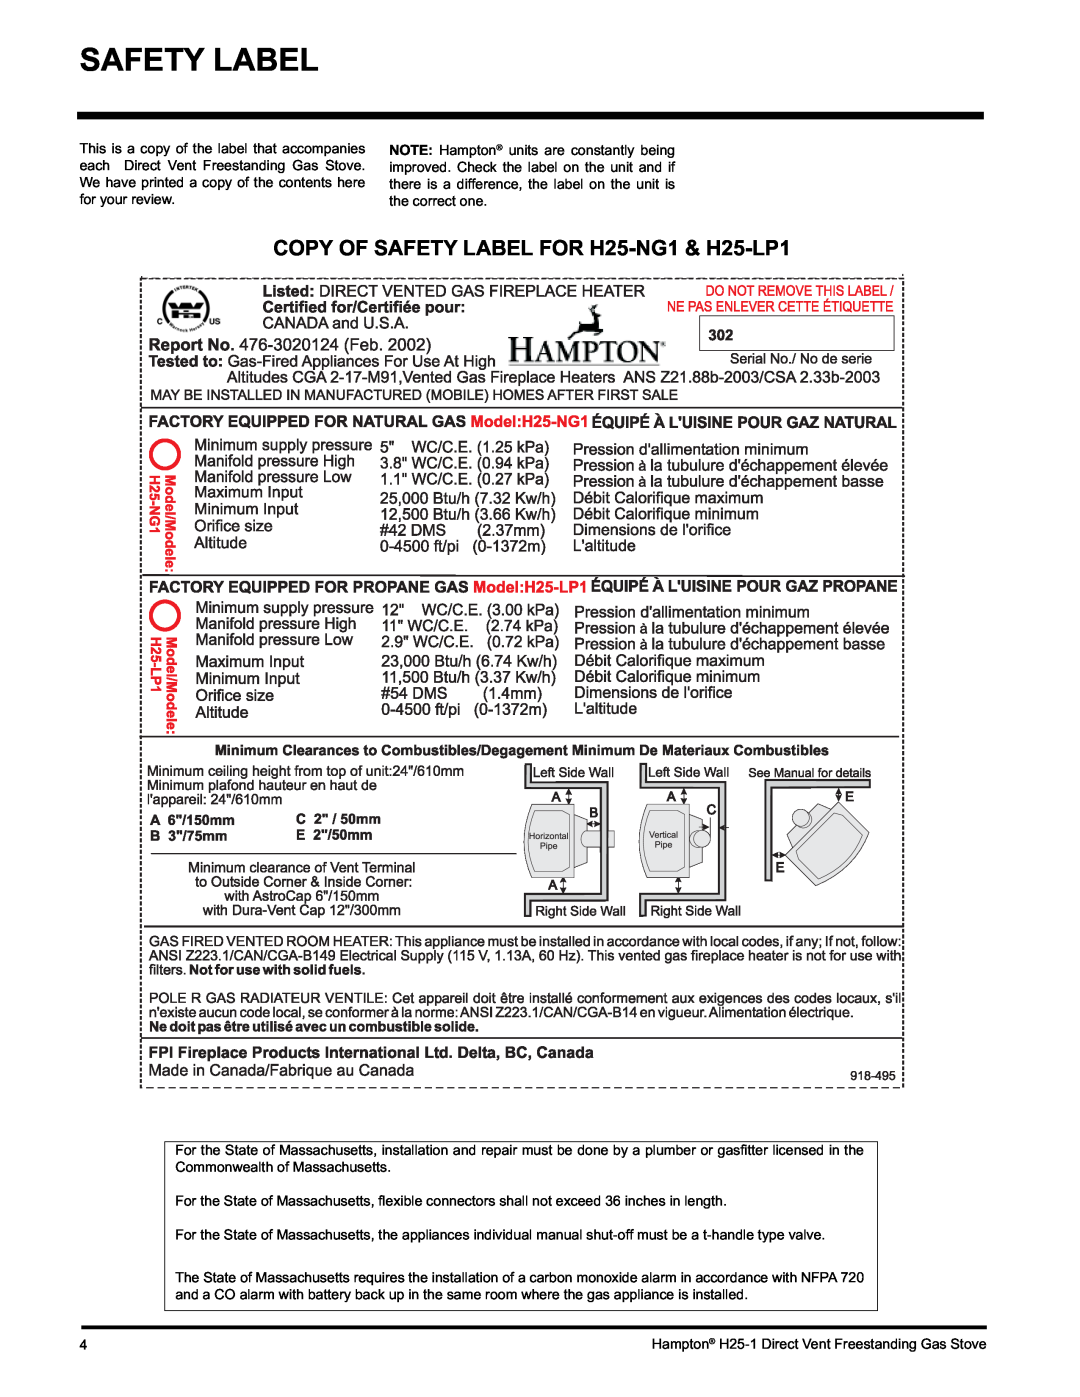 Hampton Direct installation manual Safety Label, COPY OF SAFETY LABEL FOR H25-NG1& H25-LP1 